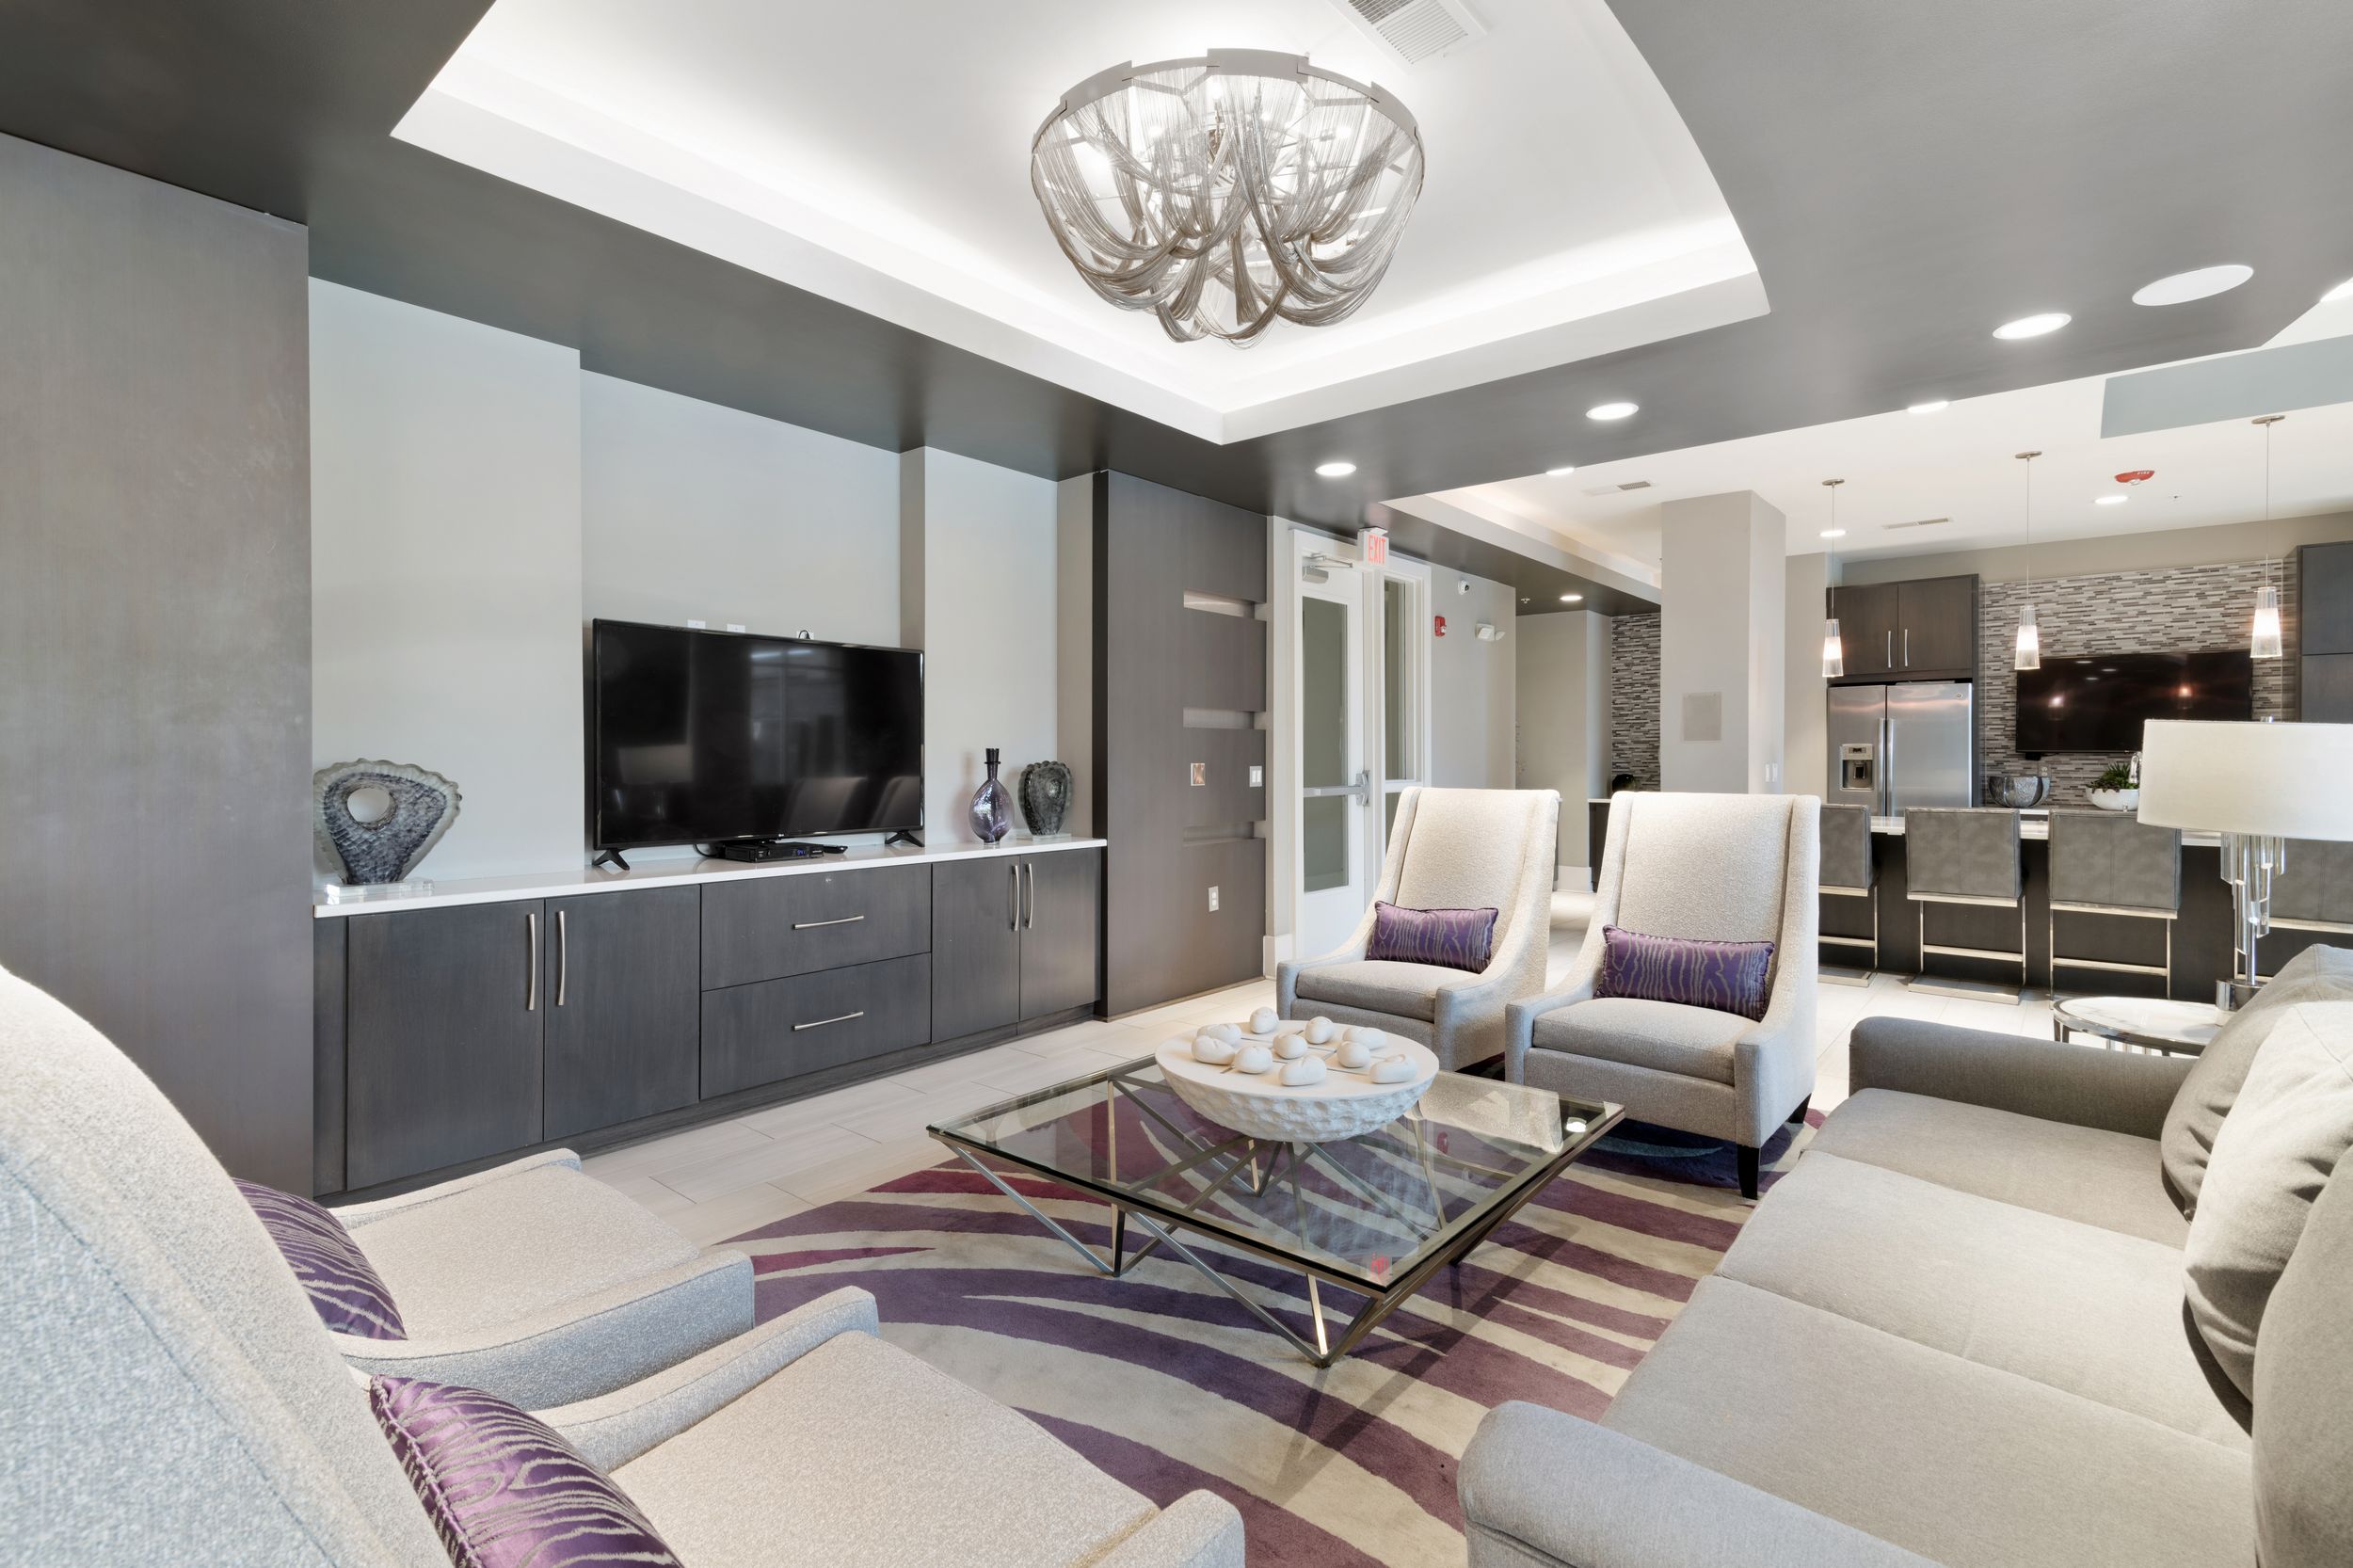 Clubhouse with modern furniture, a full-sized refrigerator, and seating areas with TVs at Lantower Weston Corners.